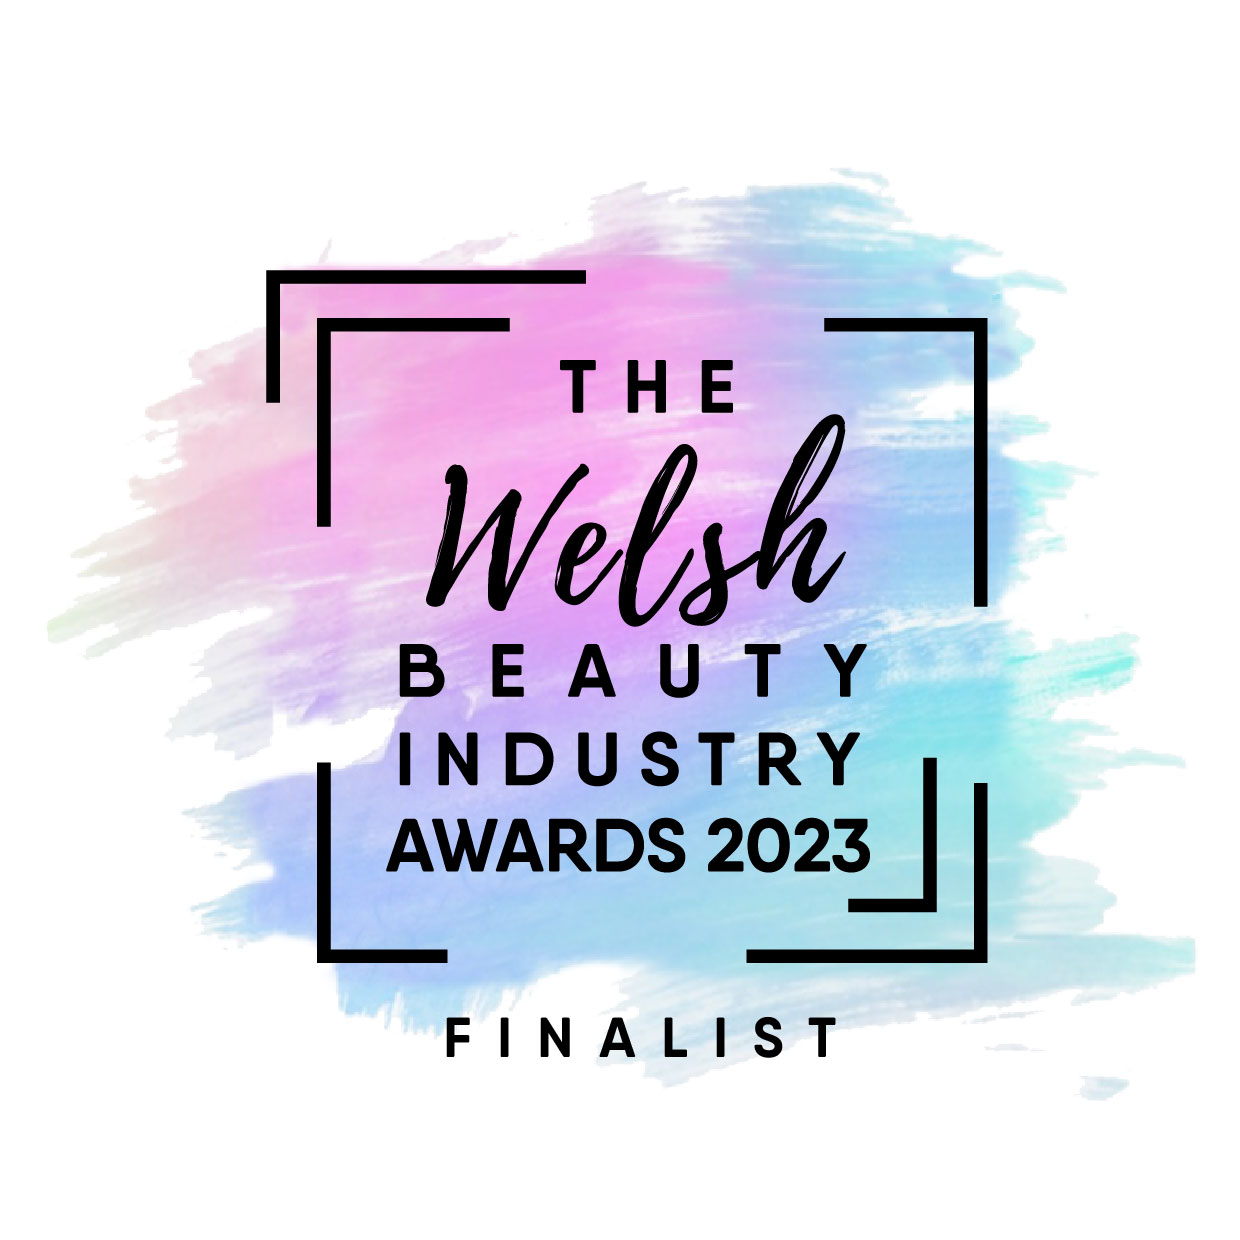 We are FINALISTS at the Welsh Beauty Industry Awards 2023